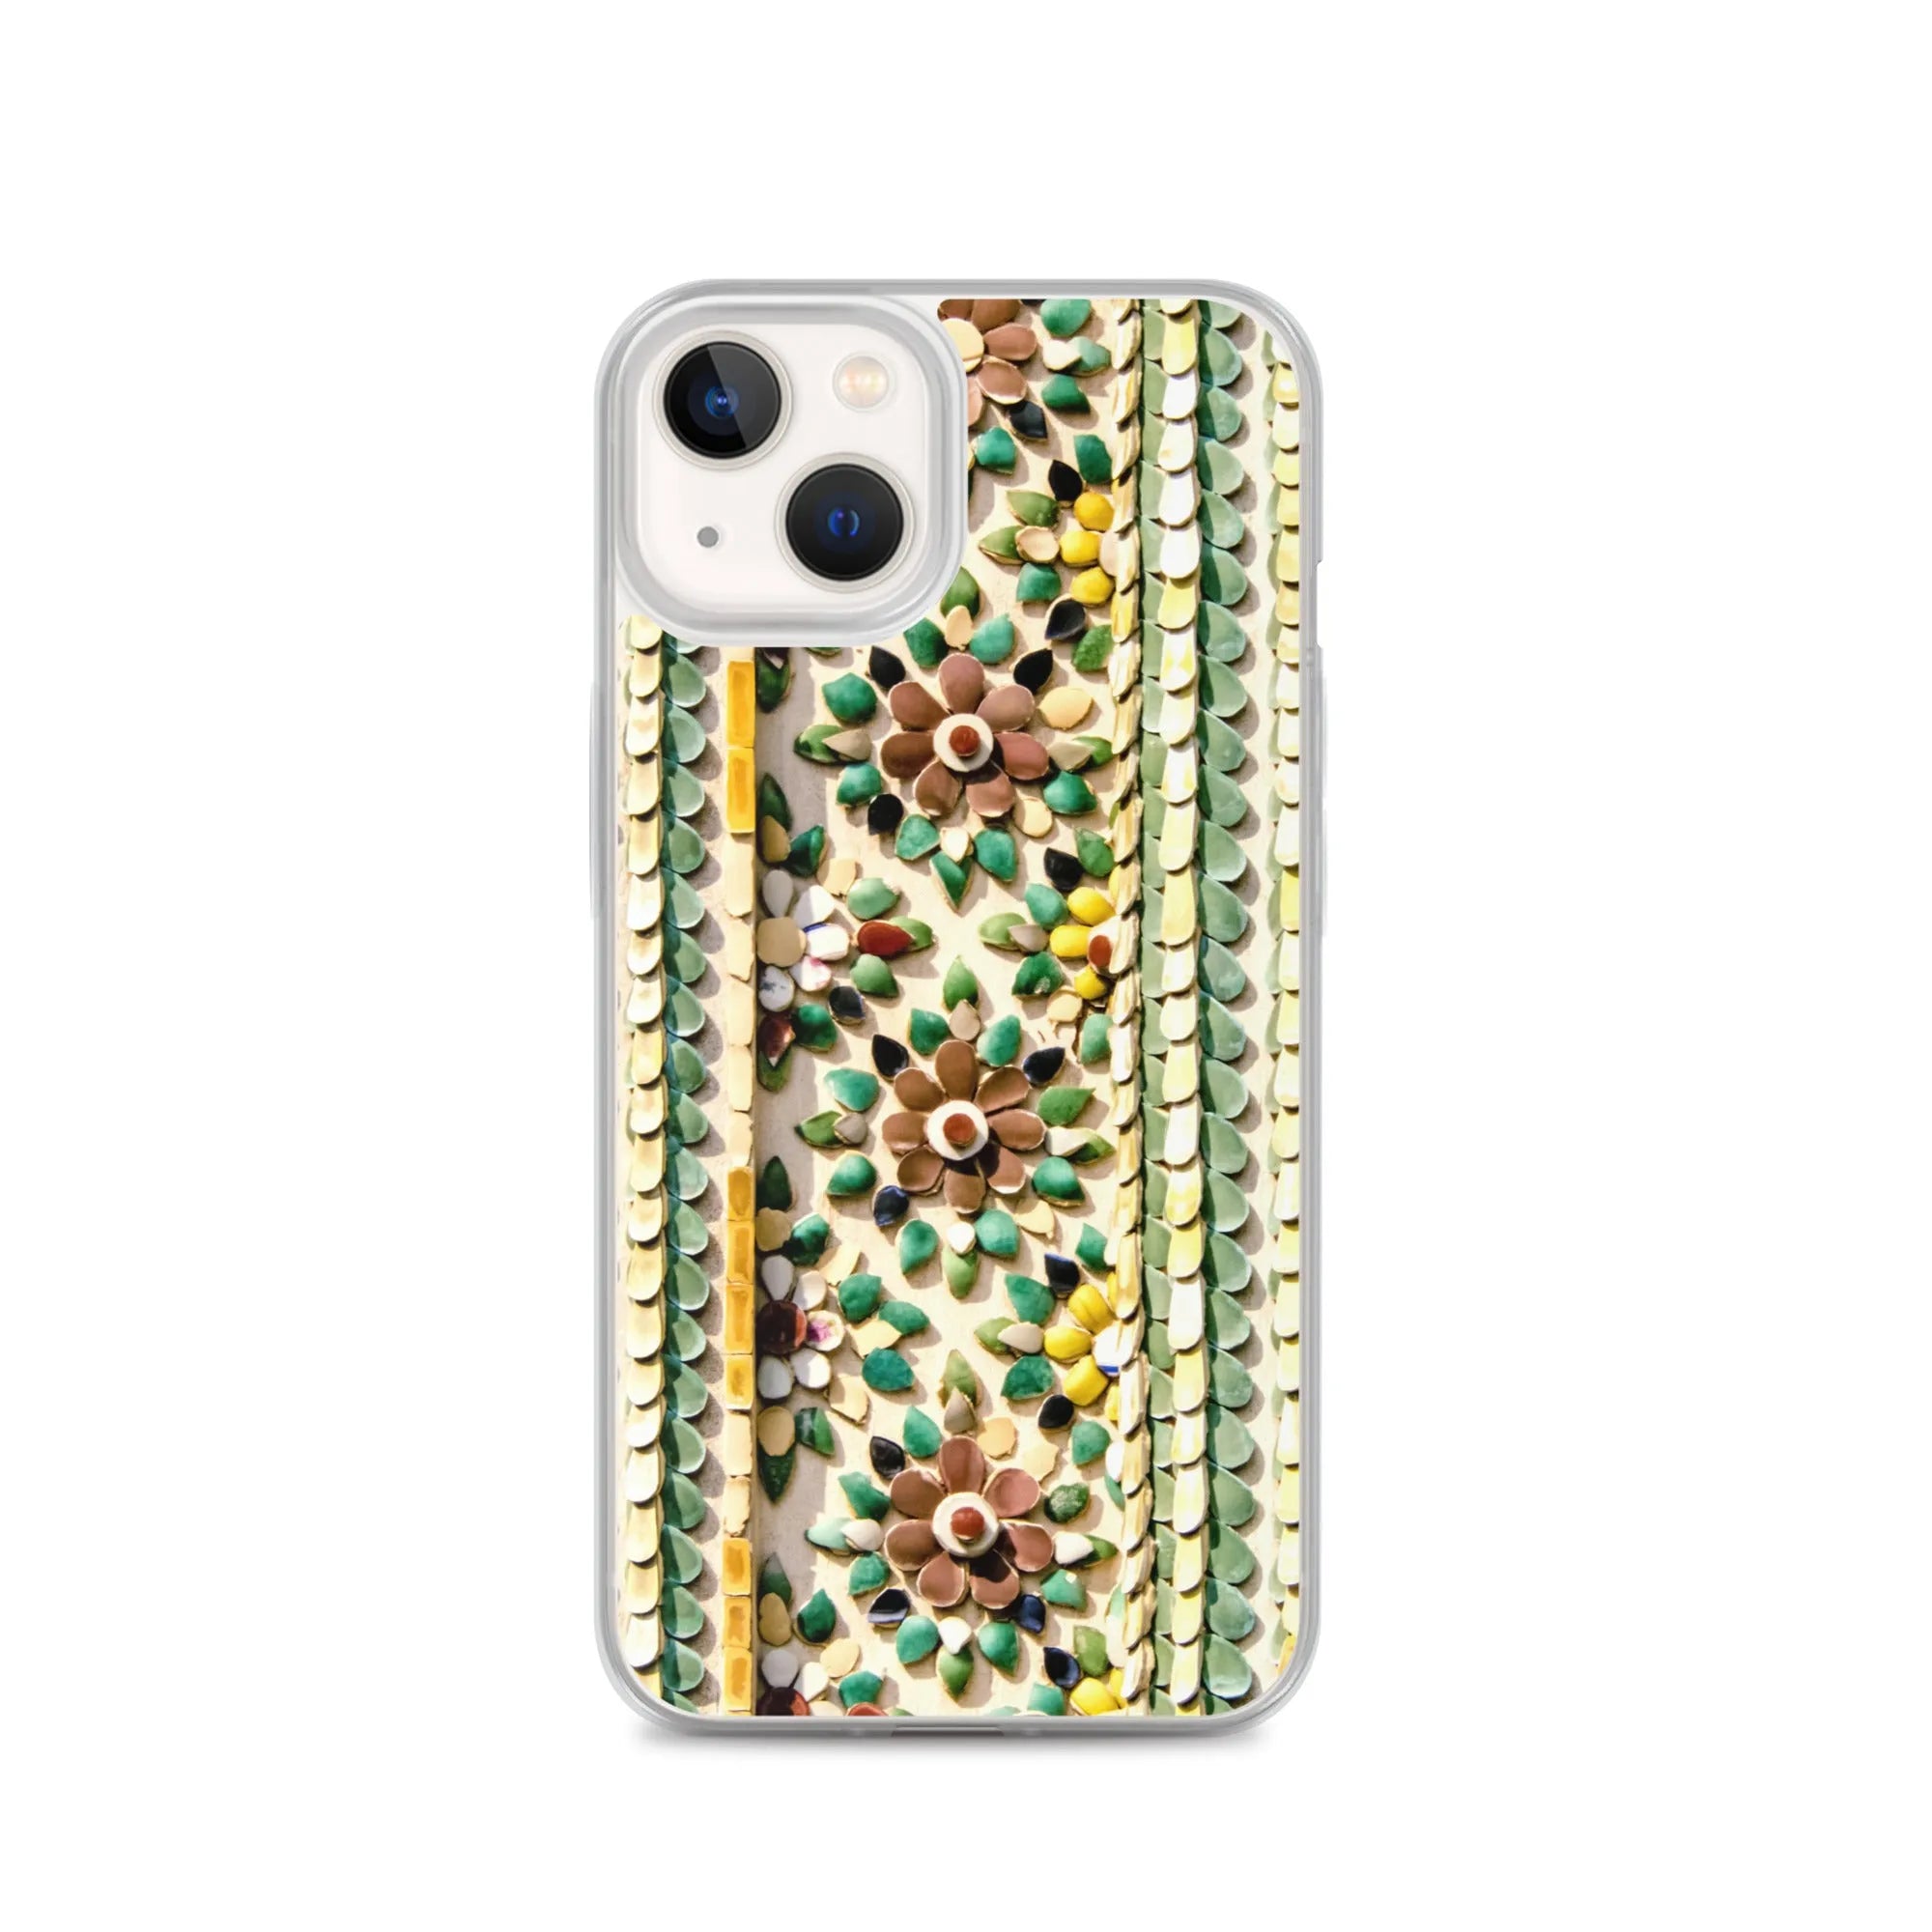 Flower Beds Pattern Iphone Case - Iphone 13 - Mobile Phone Cases - Aesthetic Art